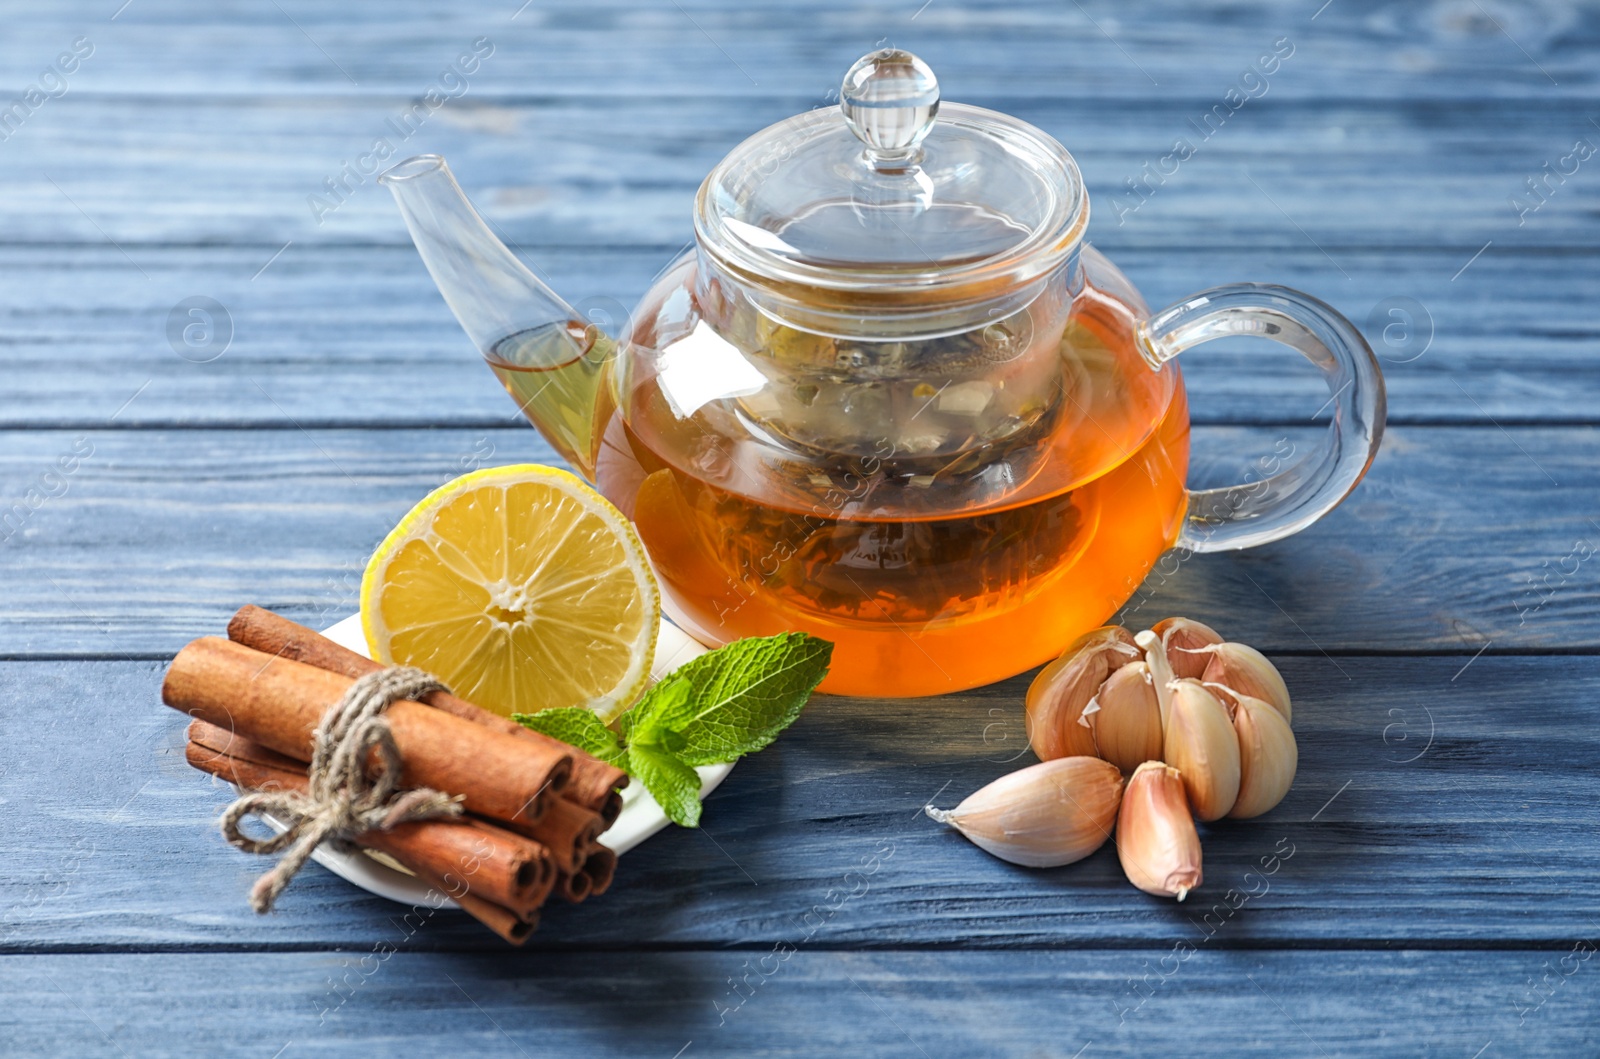 Photo of Glass teapot with hot tea, lemon and garlic as cold remedies on wooden table